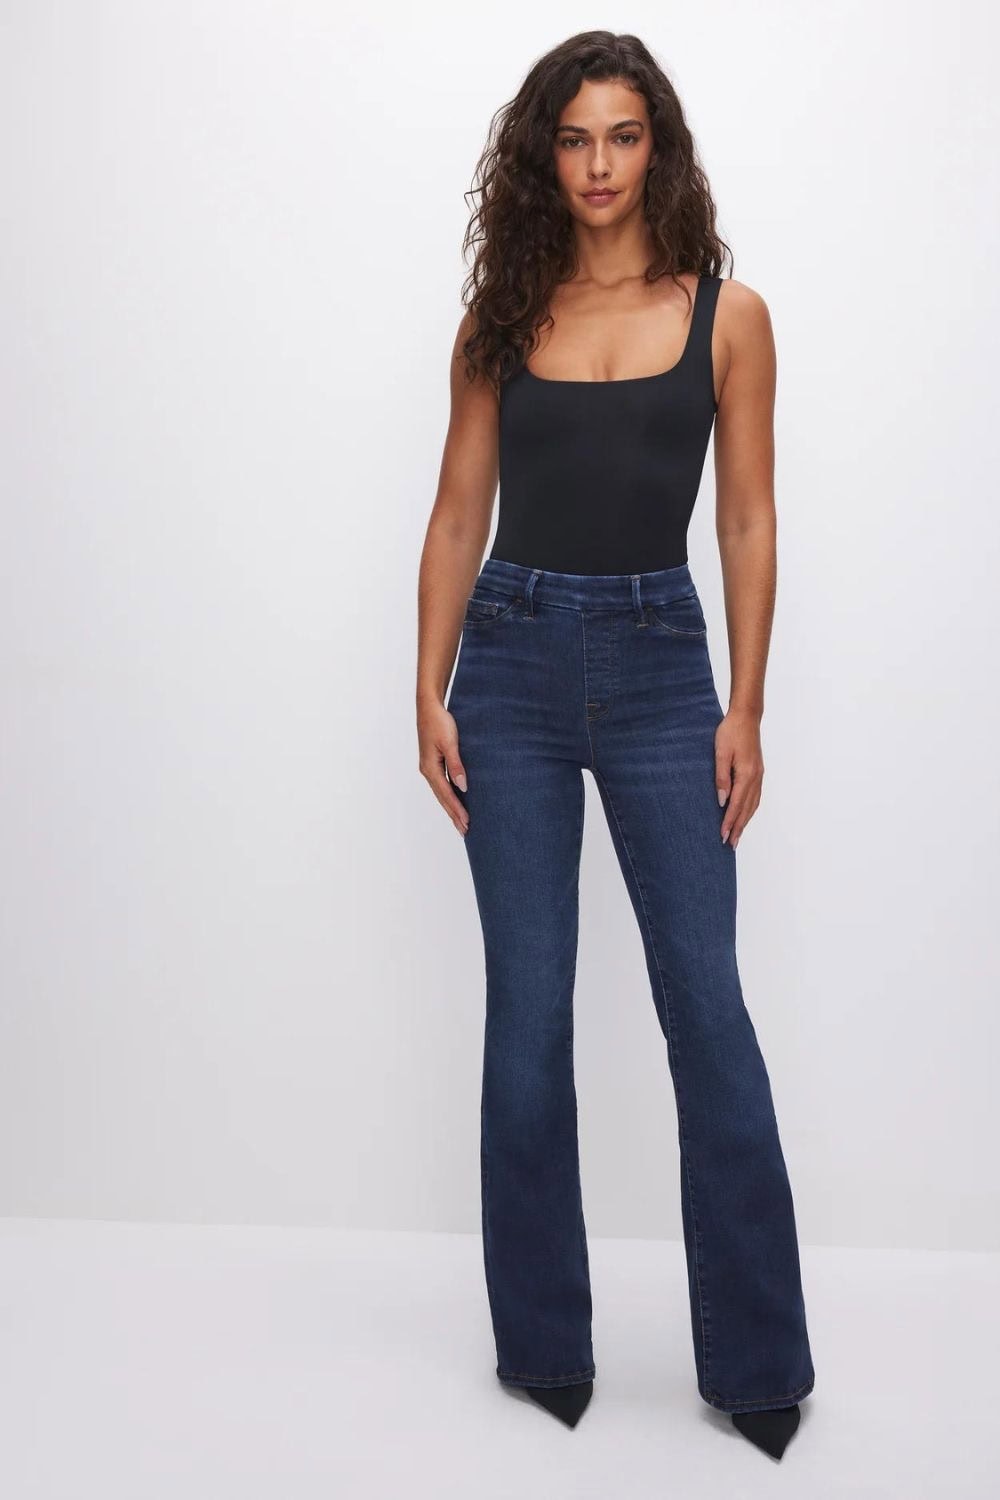 best-wrinkle-free-travel-pants-Power-Stretch-Pull-On-Flare-Jeans